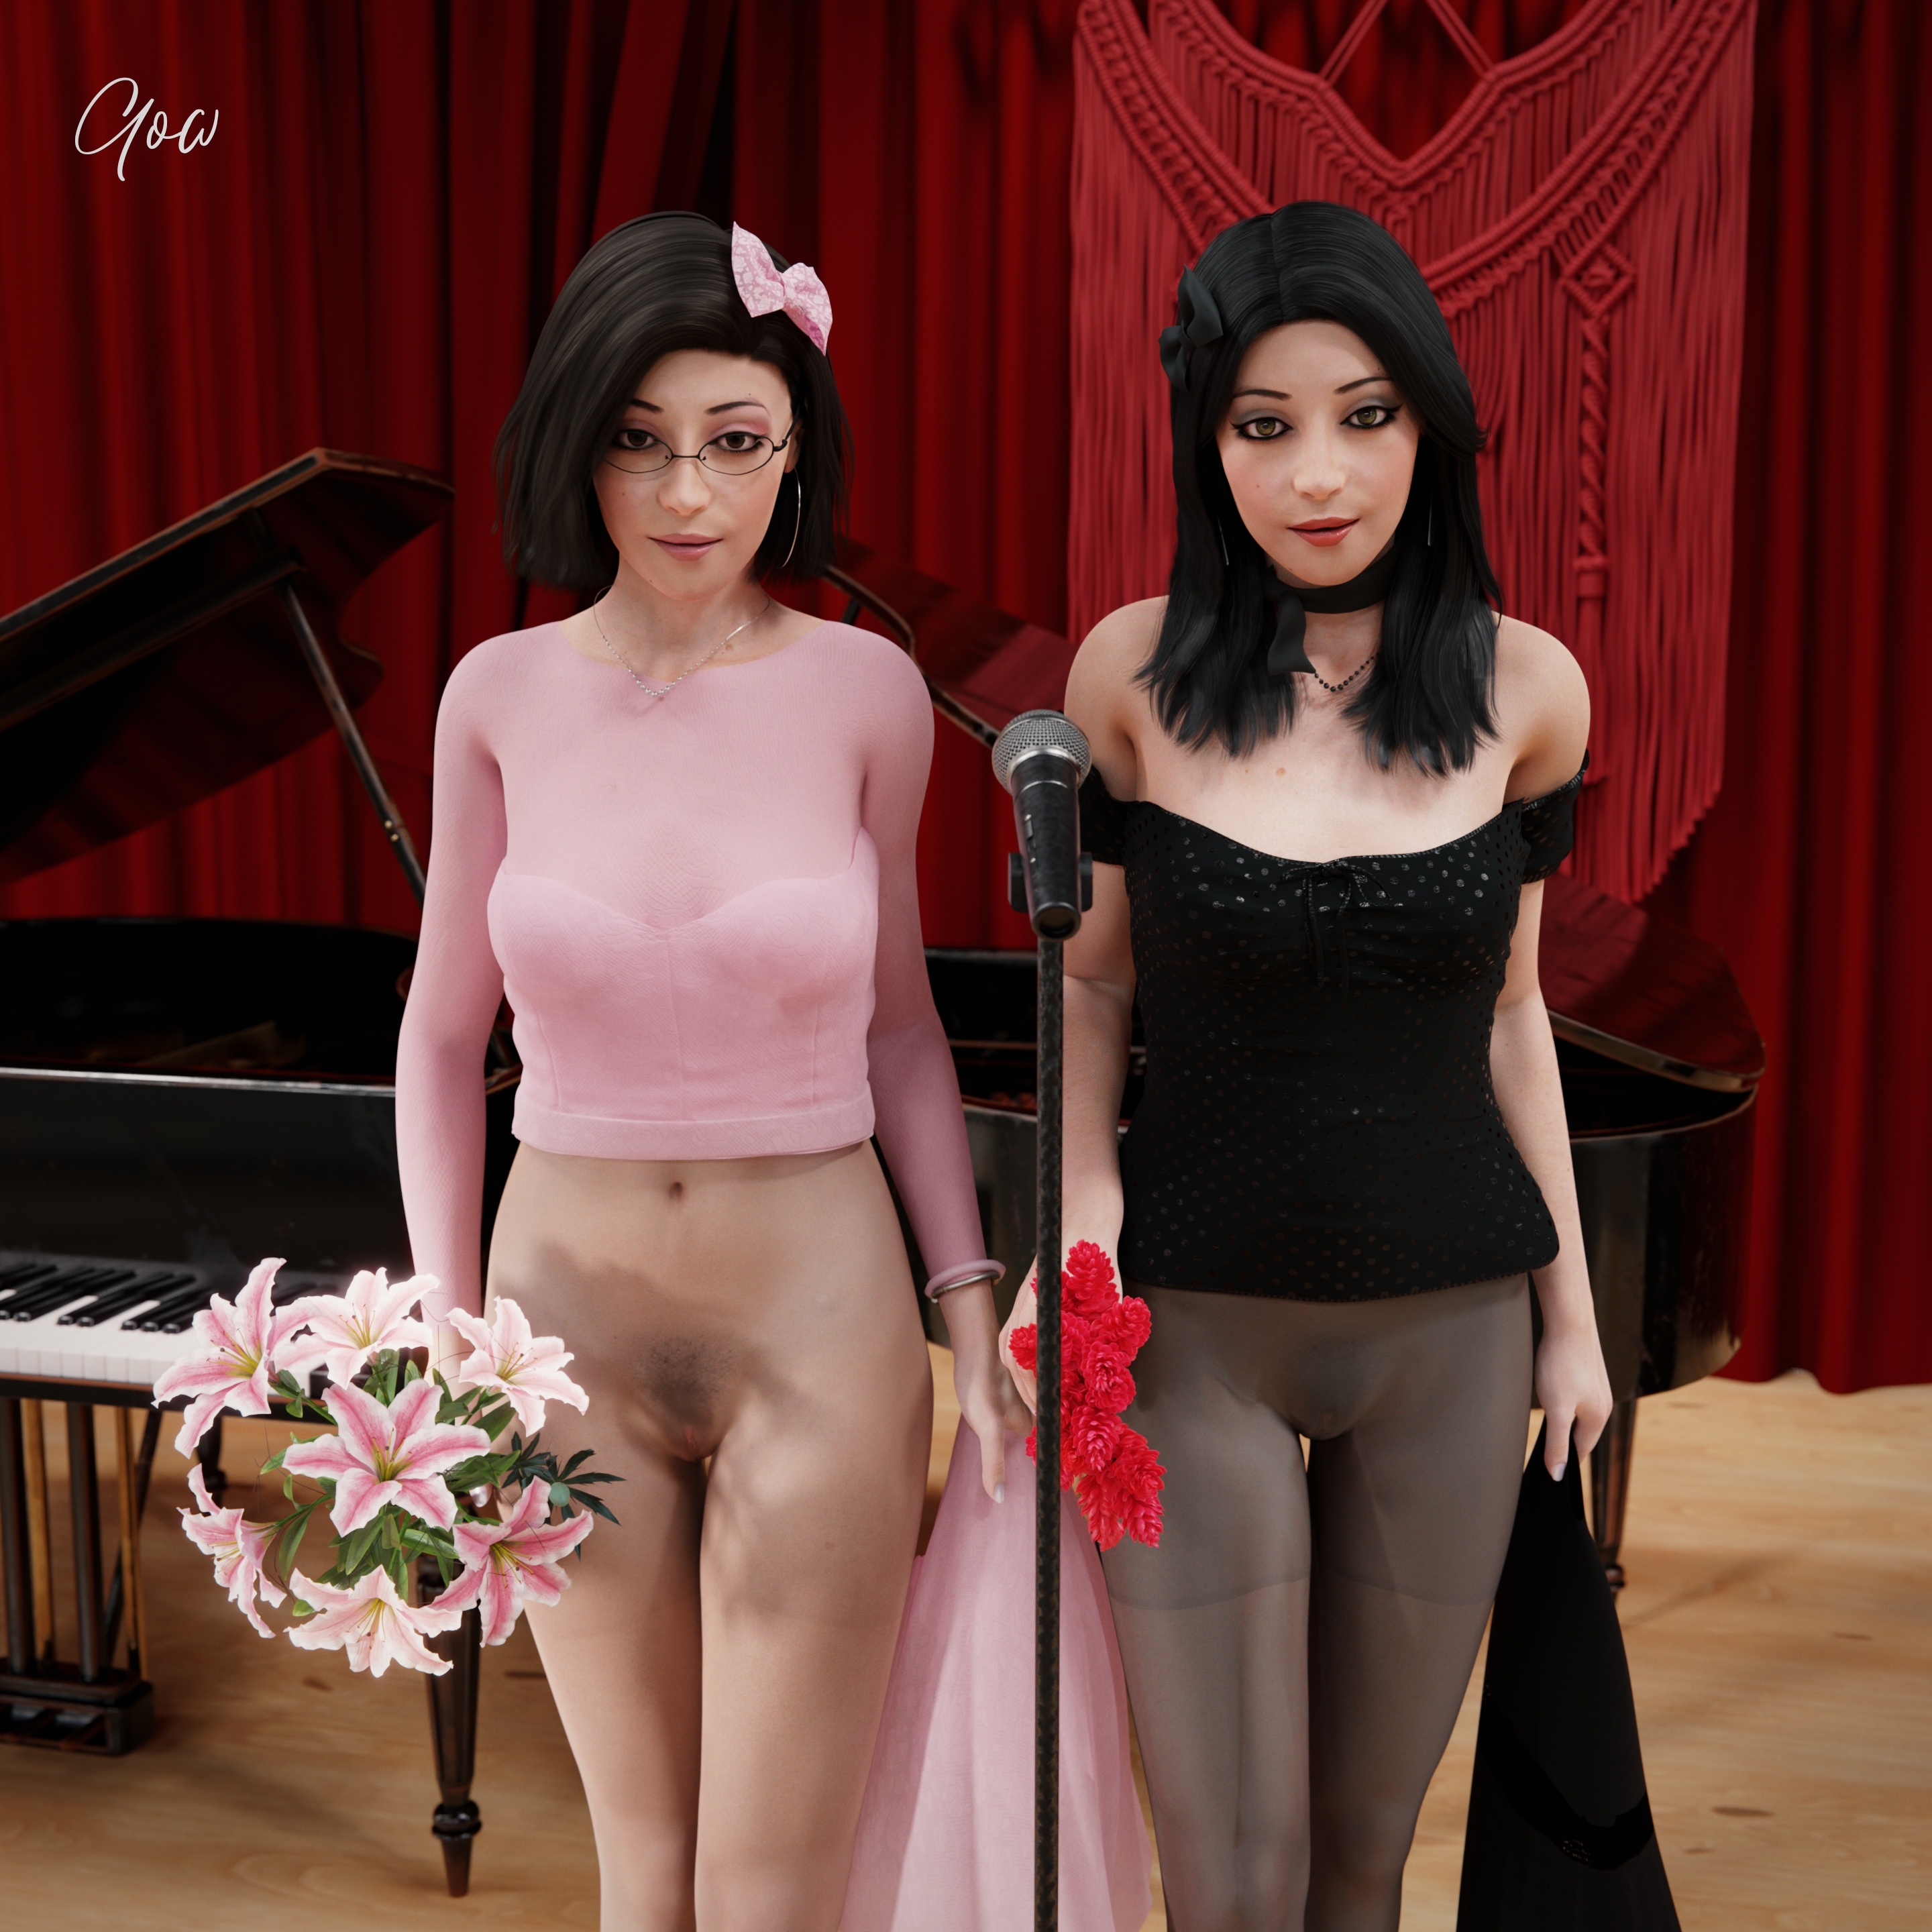 The Great Magician pt1 (Rona and Tiffany)  White Ballerina 3dnsfw Pantyhose Nylon Photorealistic Cosplay Partially_clothed Clothed Clothed/nude Clothing Wet Pussy No Panties Hairy Pussy Milf 3d Girl Sisters Brunette Shoes Party Dress Dress Night Dress Original Character See Through 7